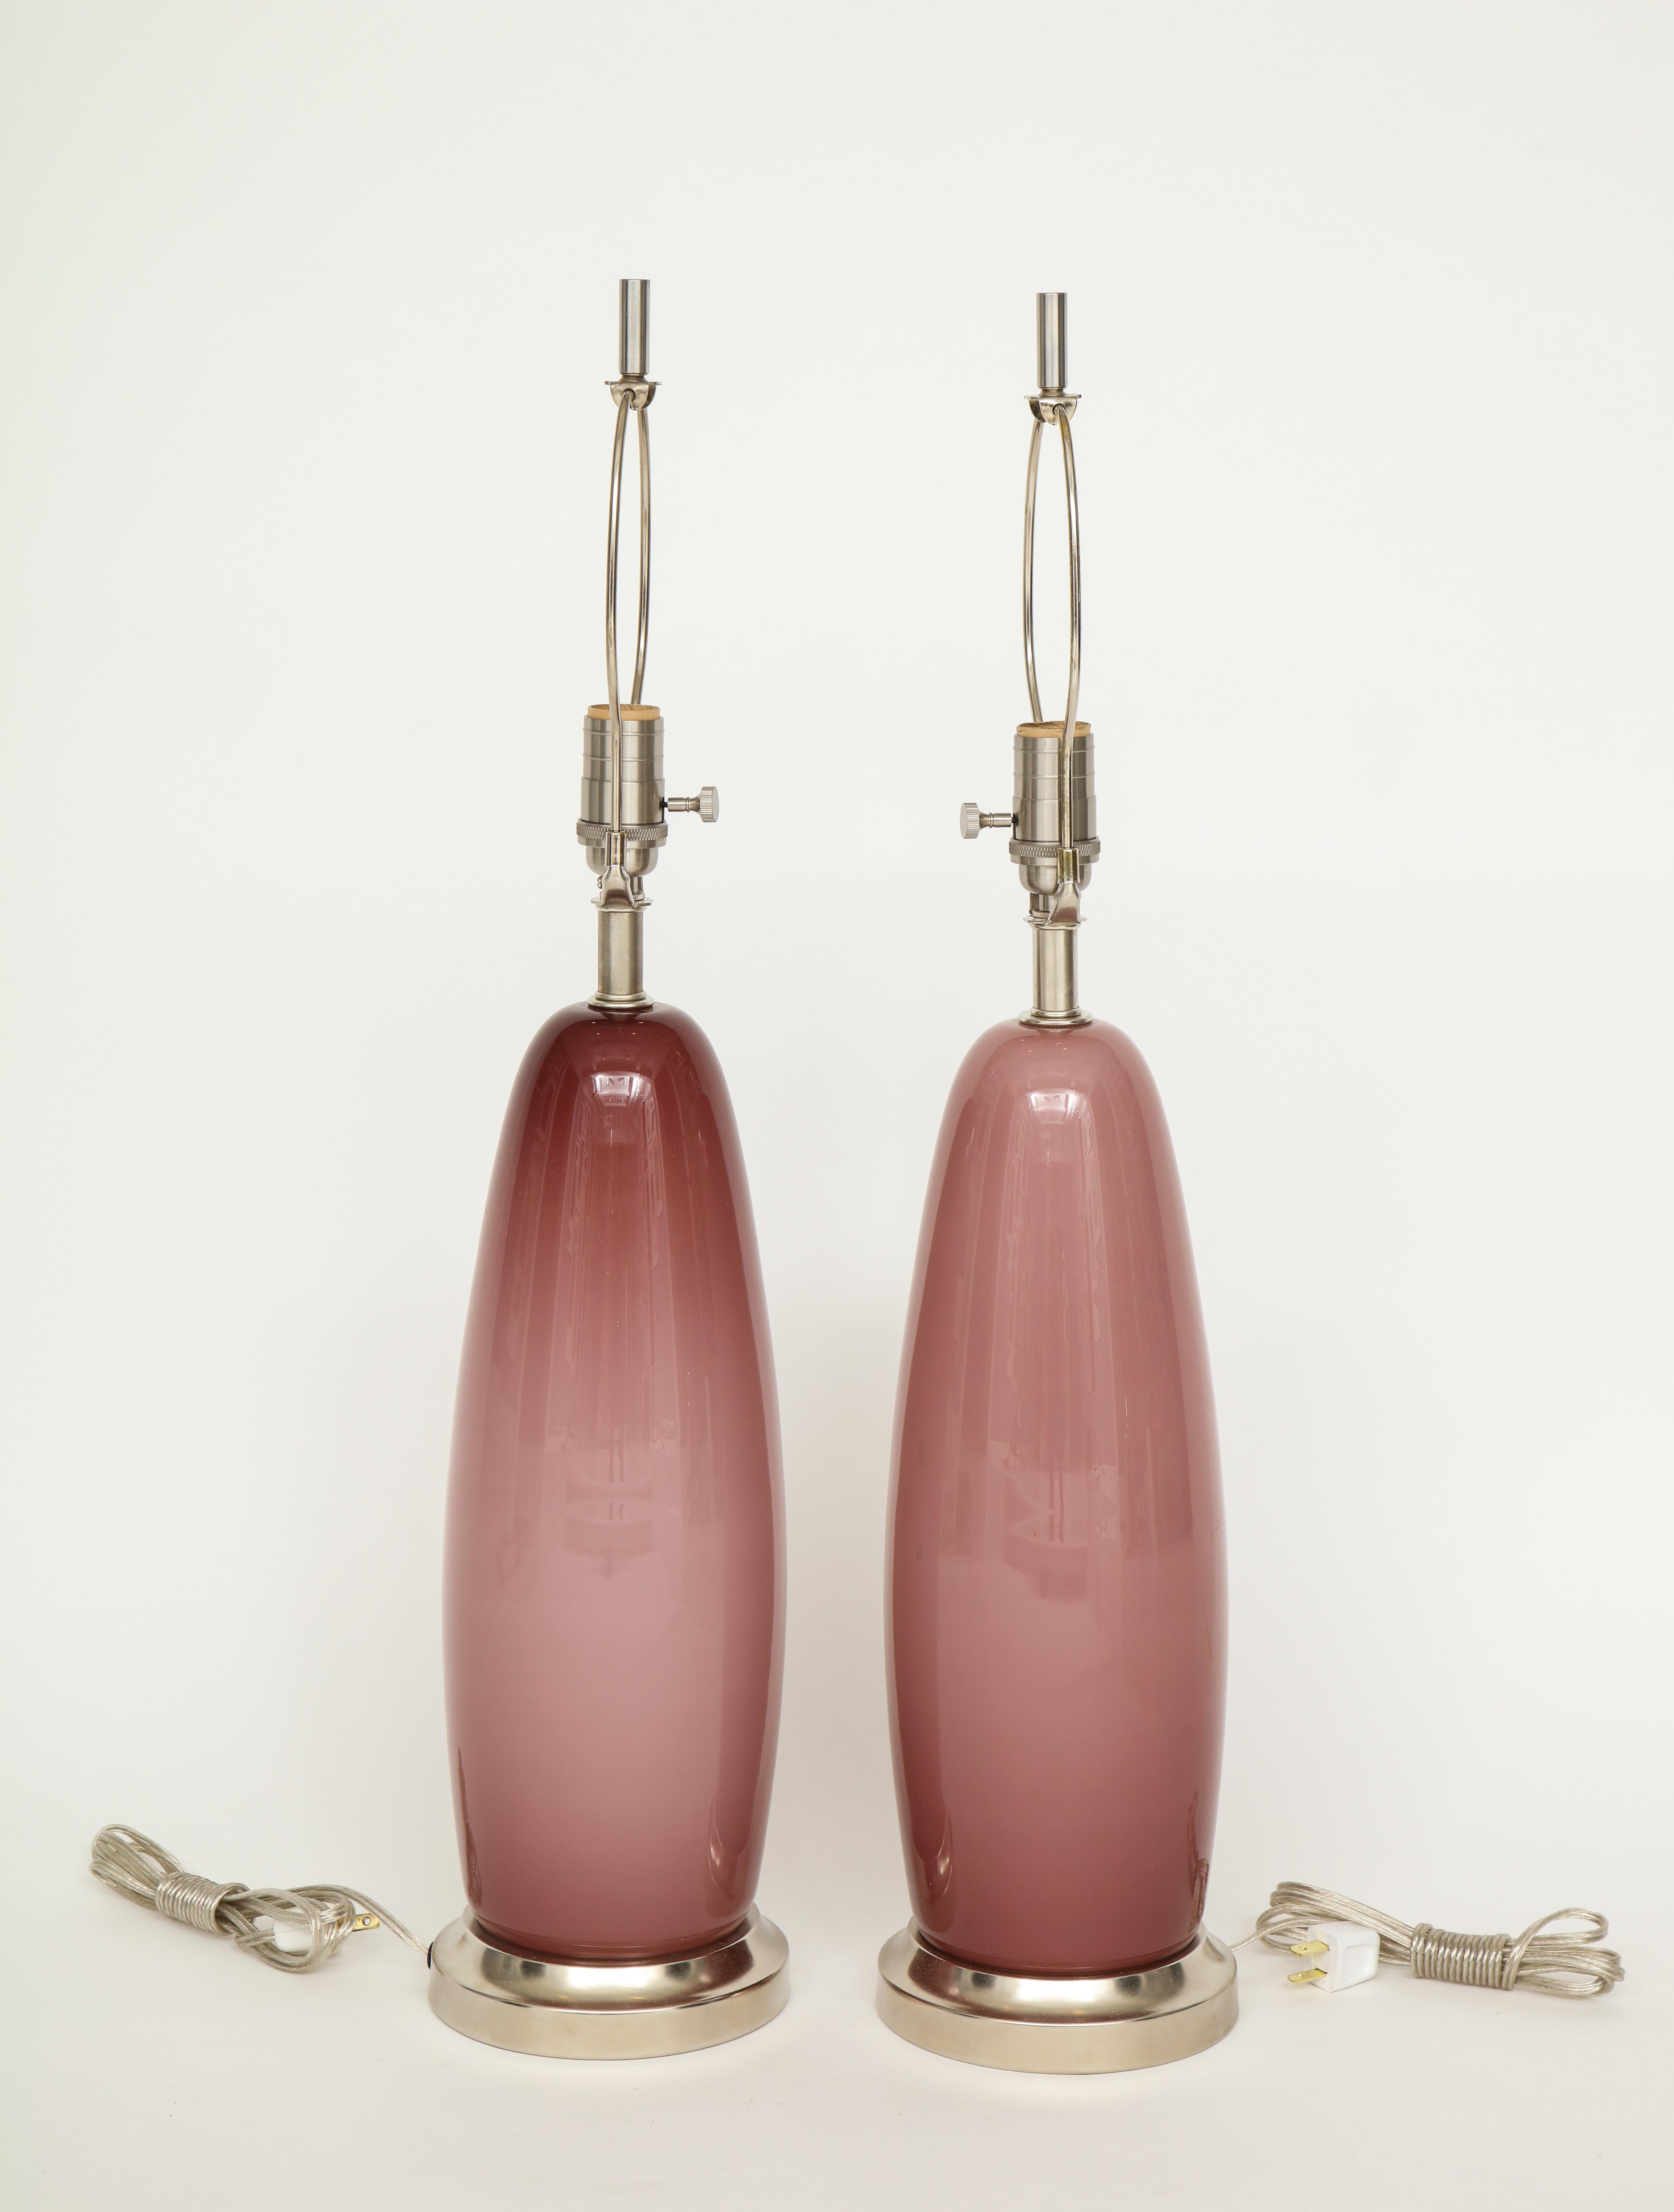 Pair of Murano glass lamps in a modern burnt Paris Pink color mounted on brushed nickel bases. Rewired for use in the USA. 100W Max bulbs. Glass body measures 17.75 inches tall.